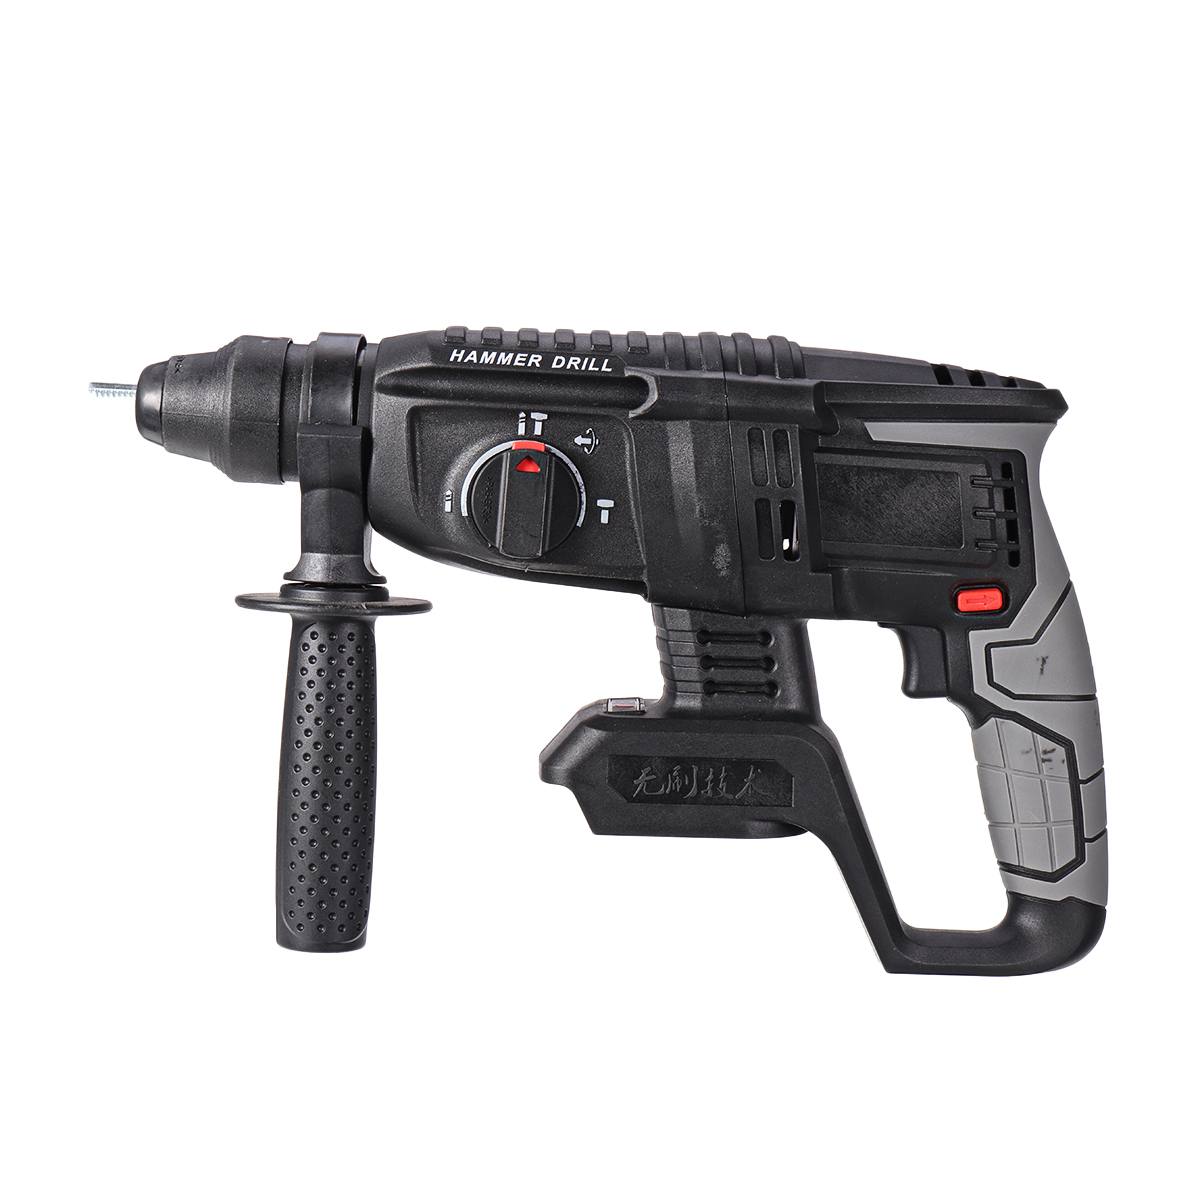 Brushless Electric Rotary Hammer Rechargeable Multifunction Hammer Impact Power Drill Tool for 198Vf Makita Battery